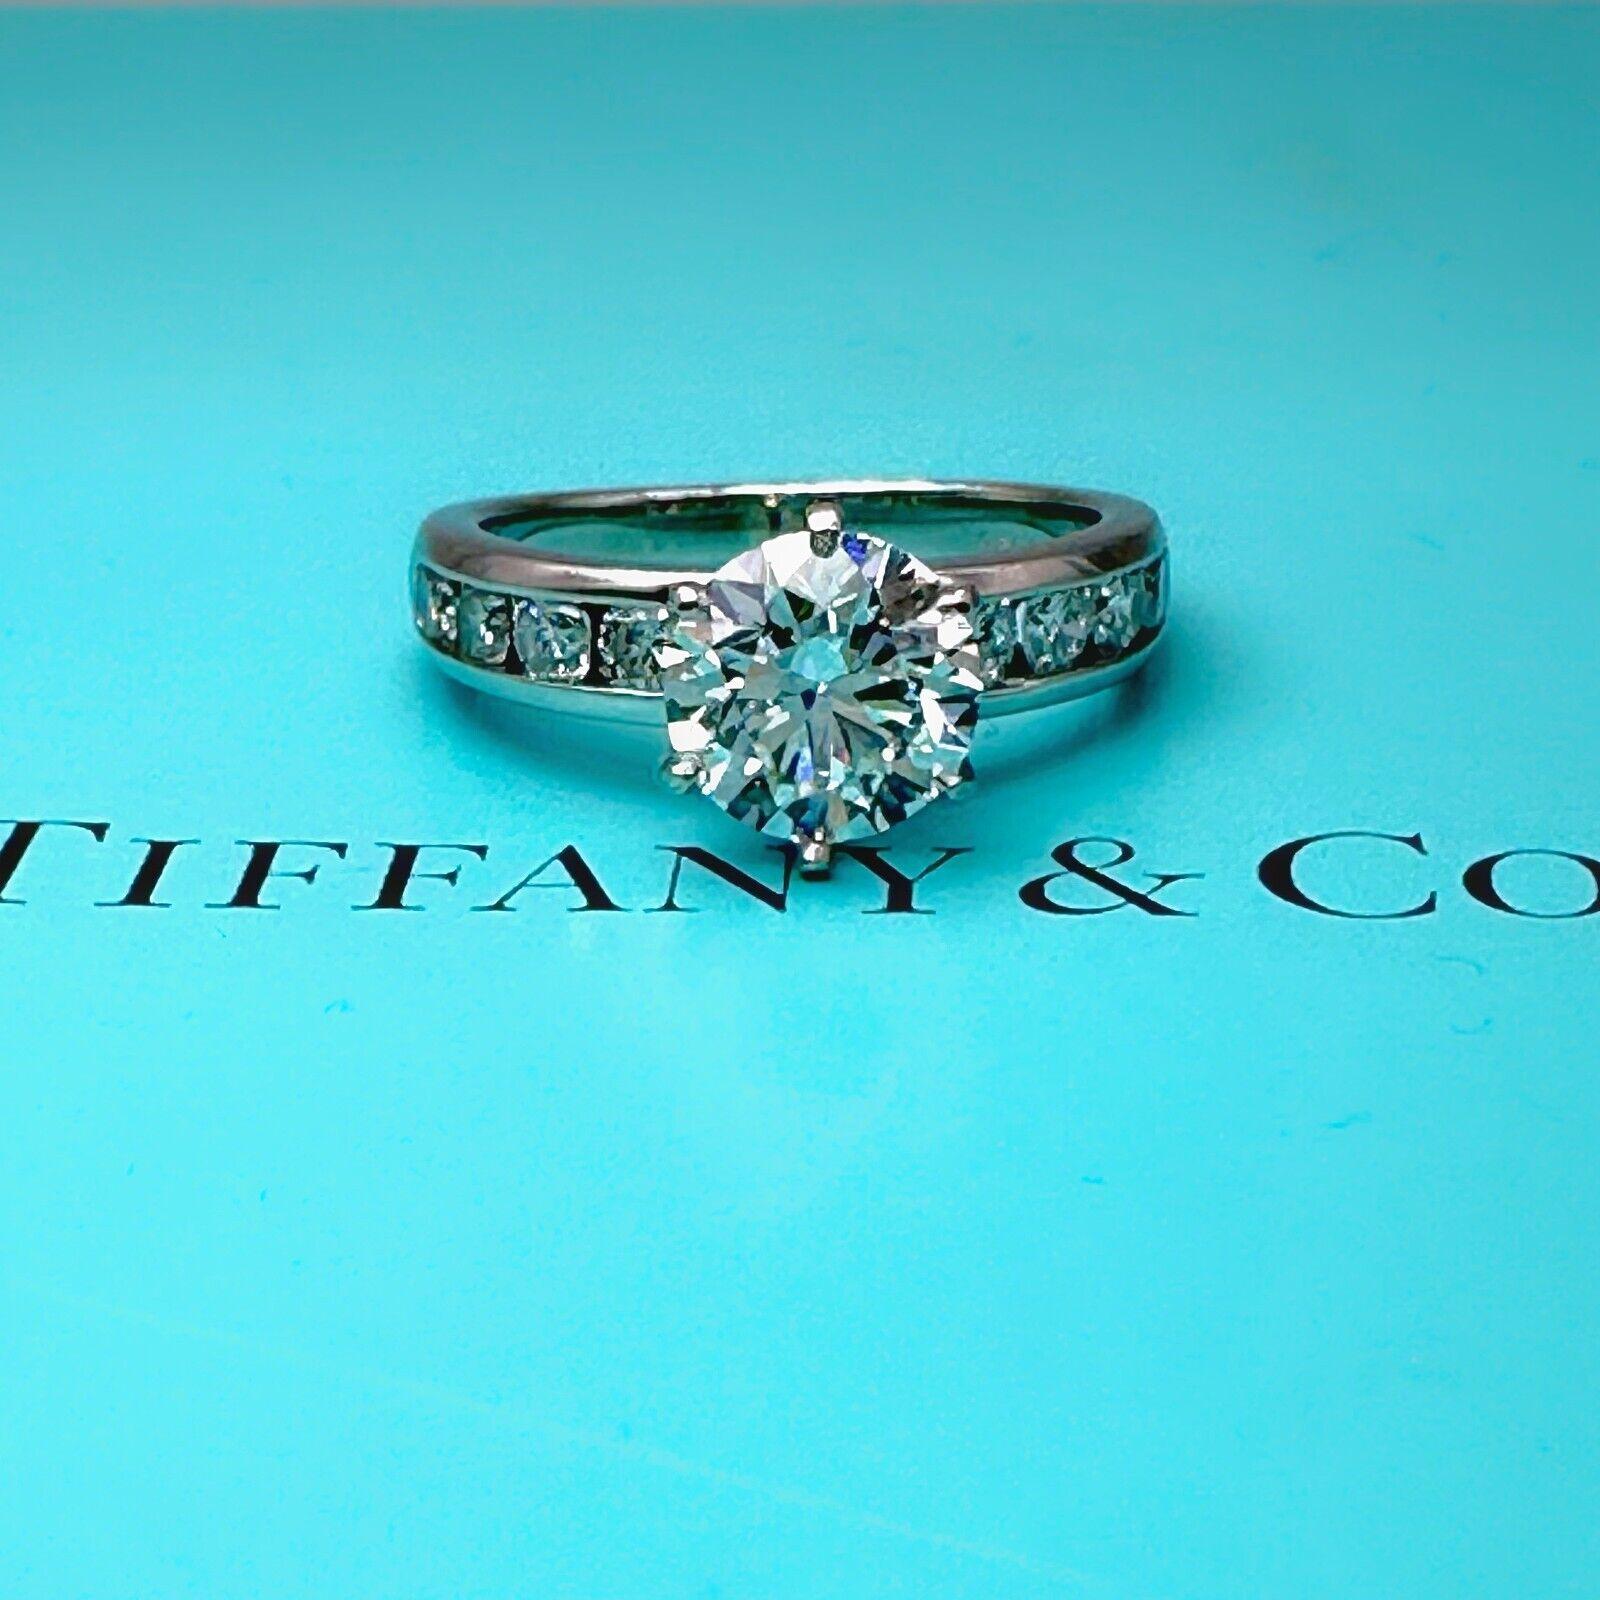 Tiffany & Co. 2.75 tcw Tiffany Setting Channel-Set Diamond Band Eng Ring Plat For Sale 2